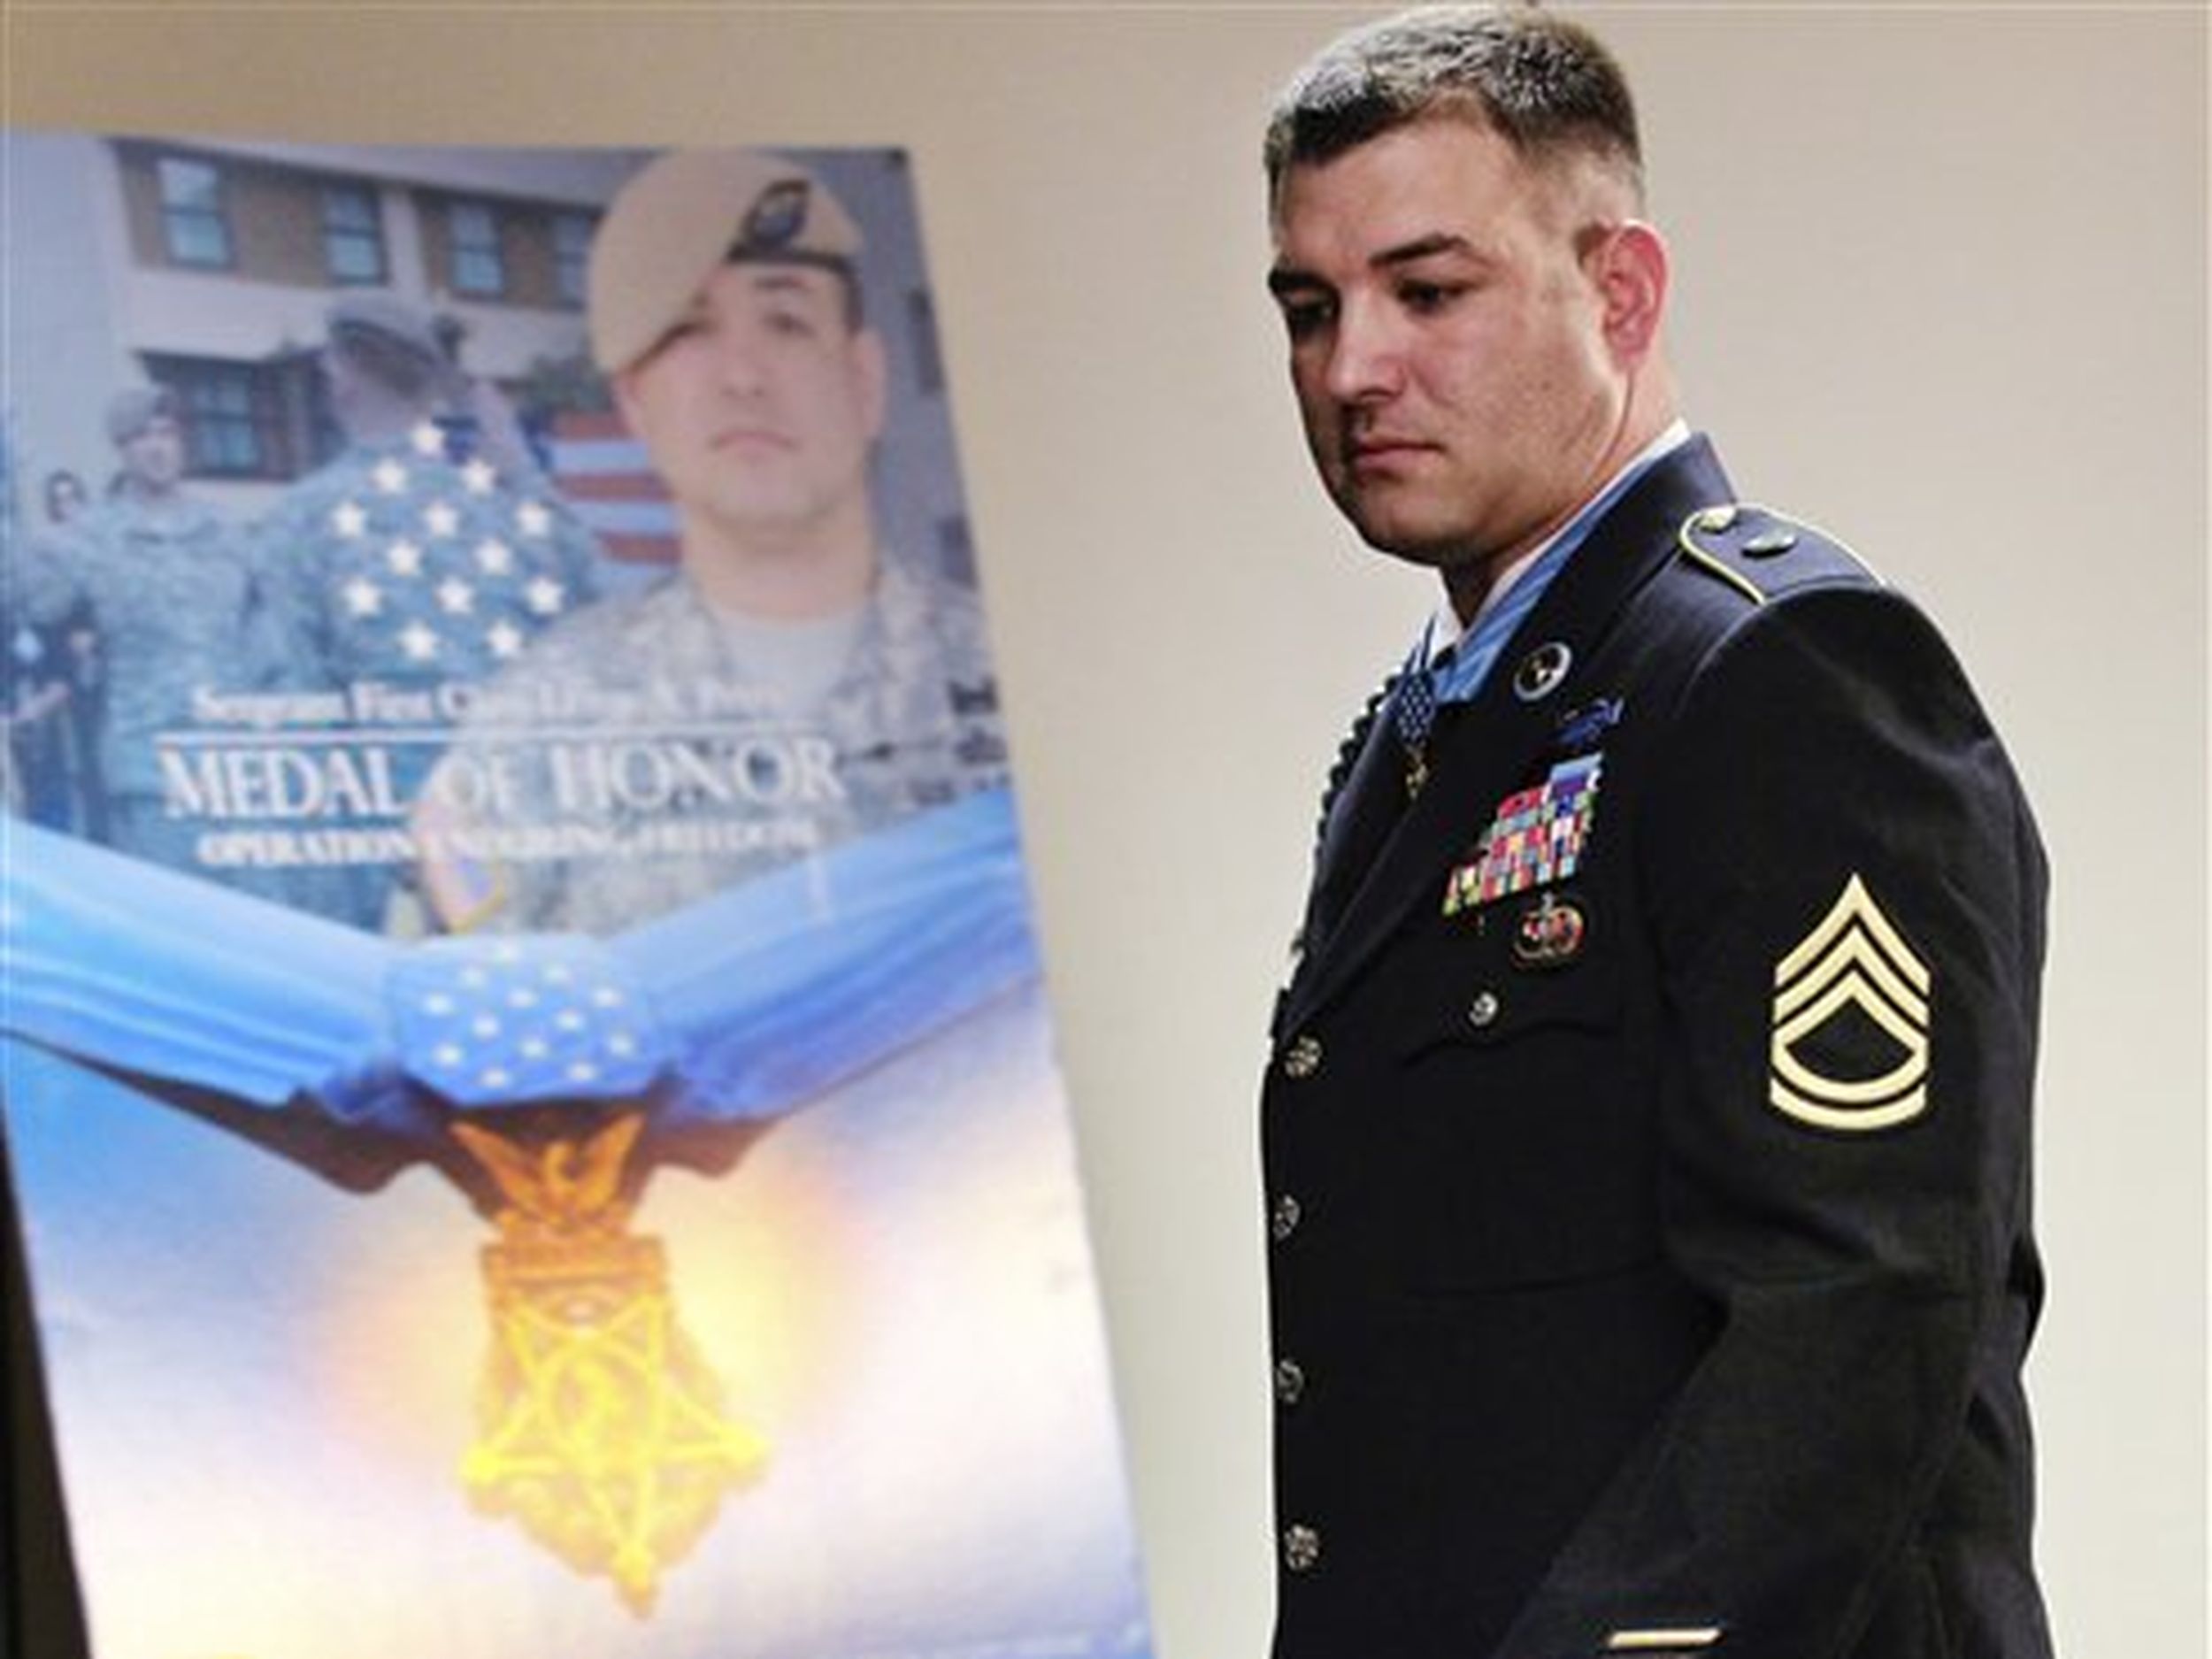 Medal of Honor recipient welcomed back in Washington